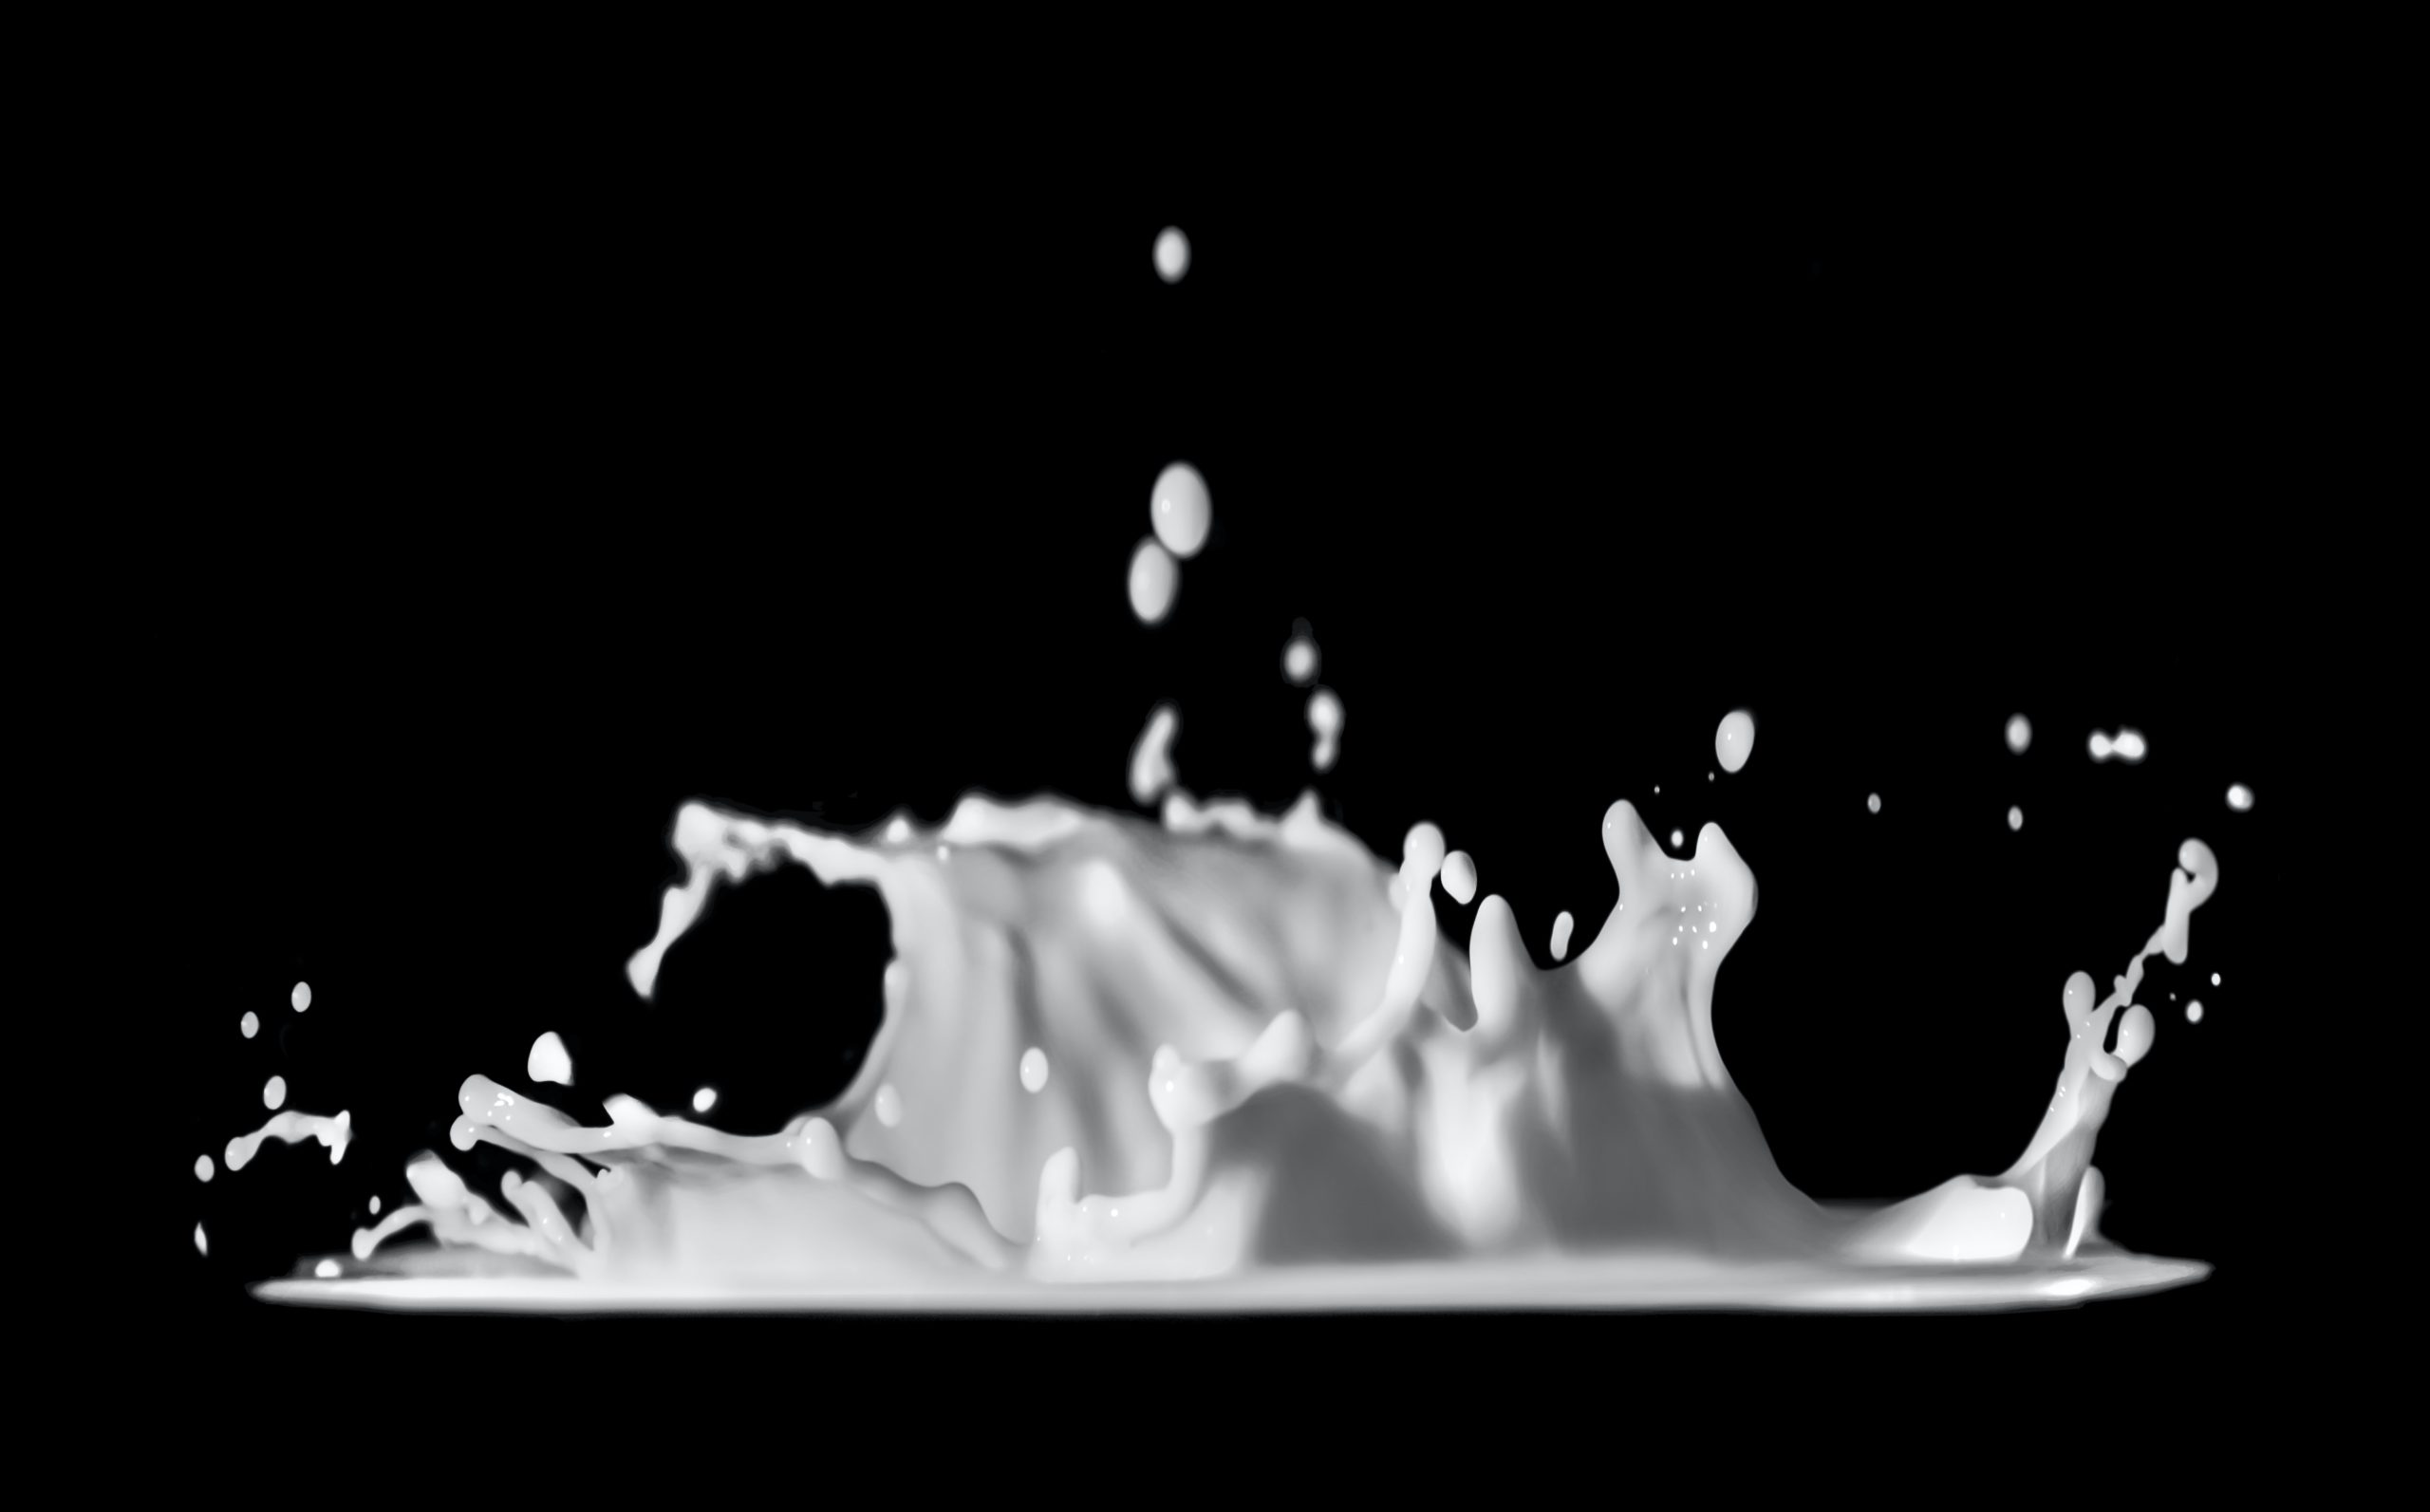 Remilk raises USD 120 million for animal-free dairy products